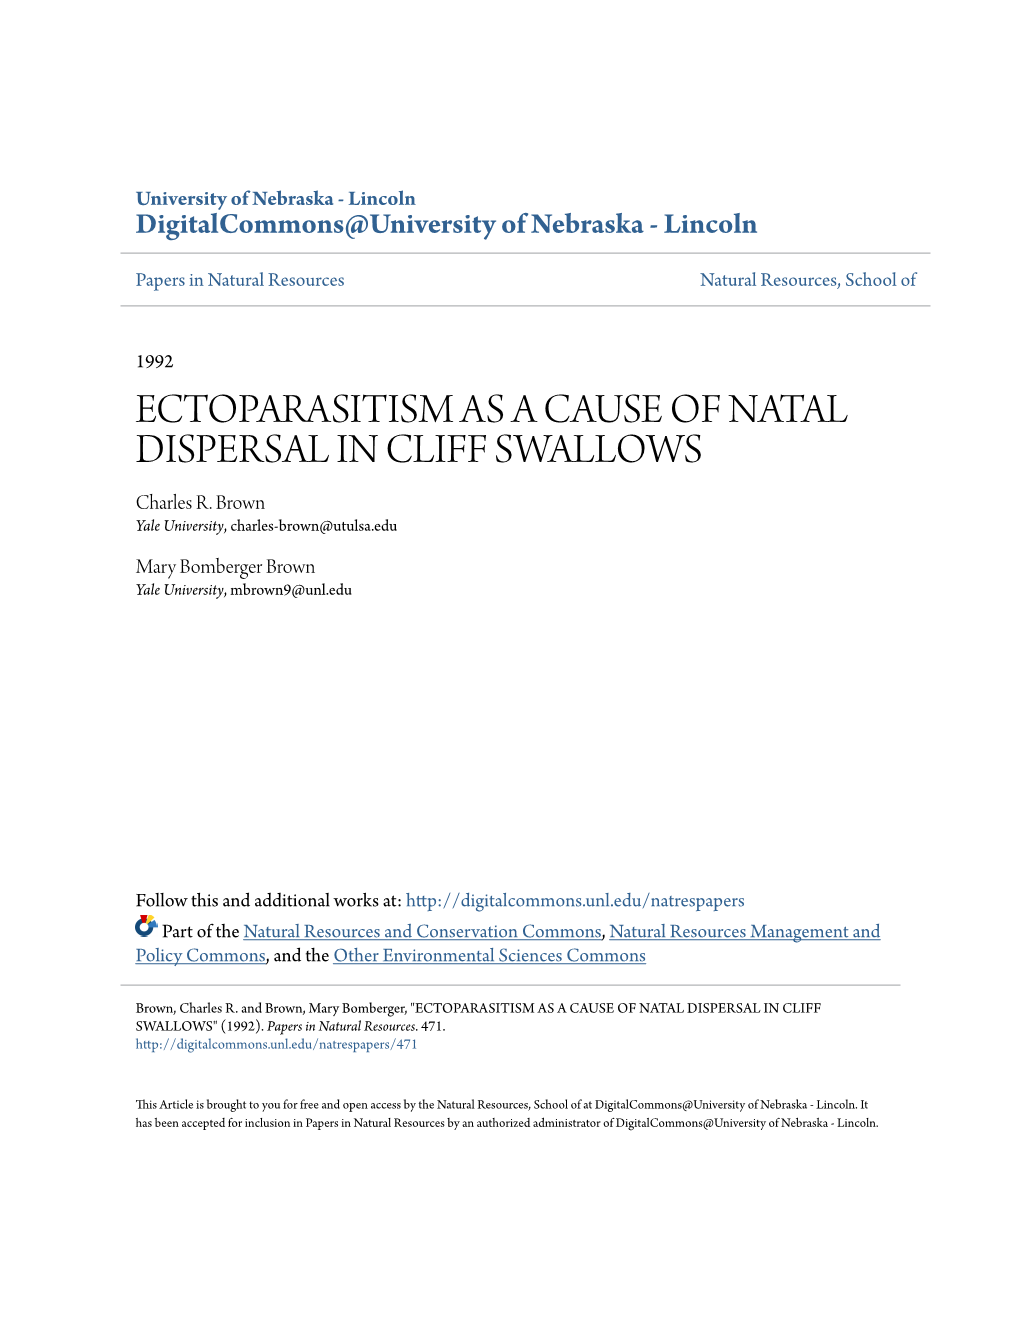 ECTOPARASITISM AS a CAUSE of NATAL DISPERSAL in CLIFF SWALLOWS Charles R